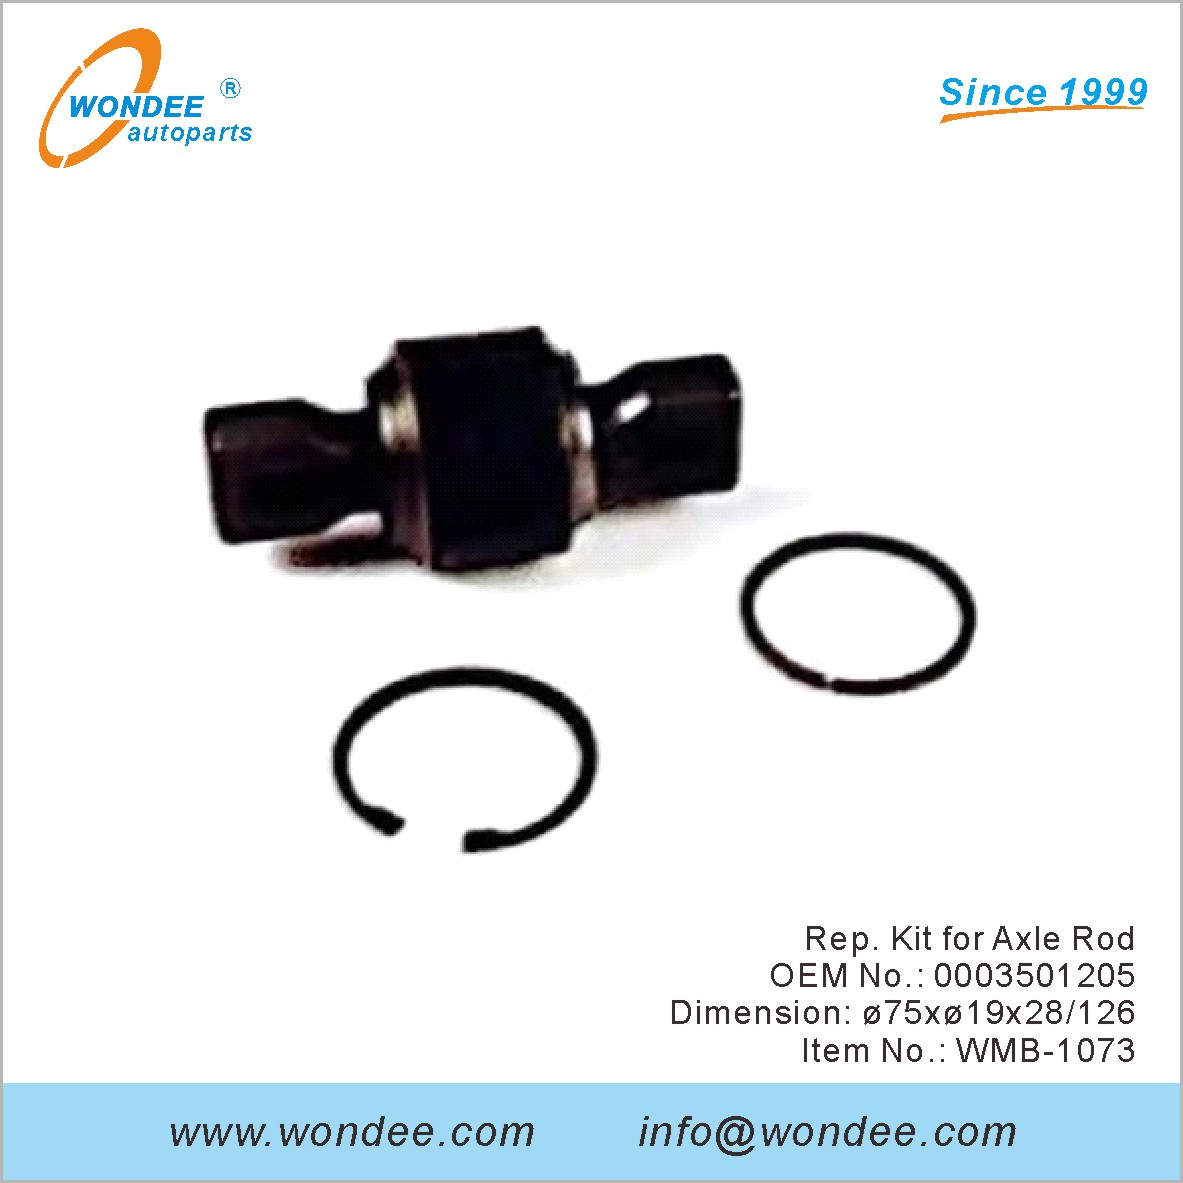 Rep. Kit for Axle Rod OEM 0003501205 for Benz from WONDEE